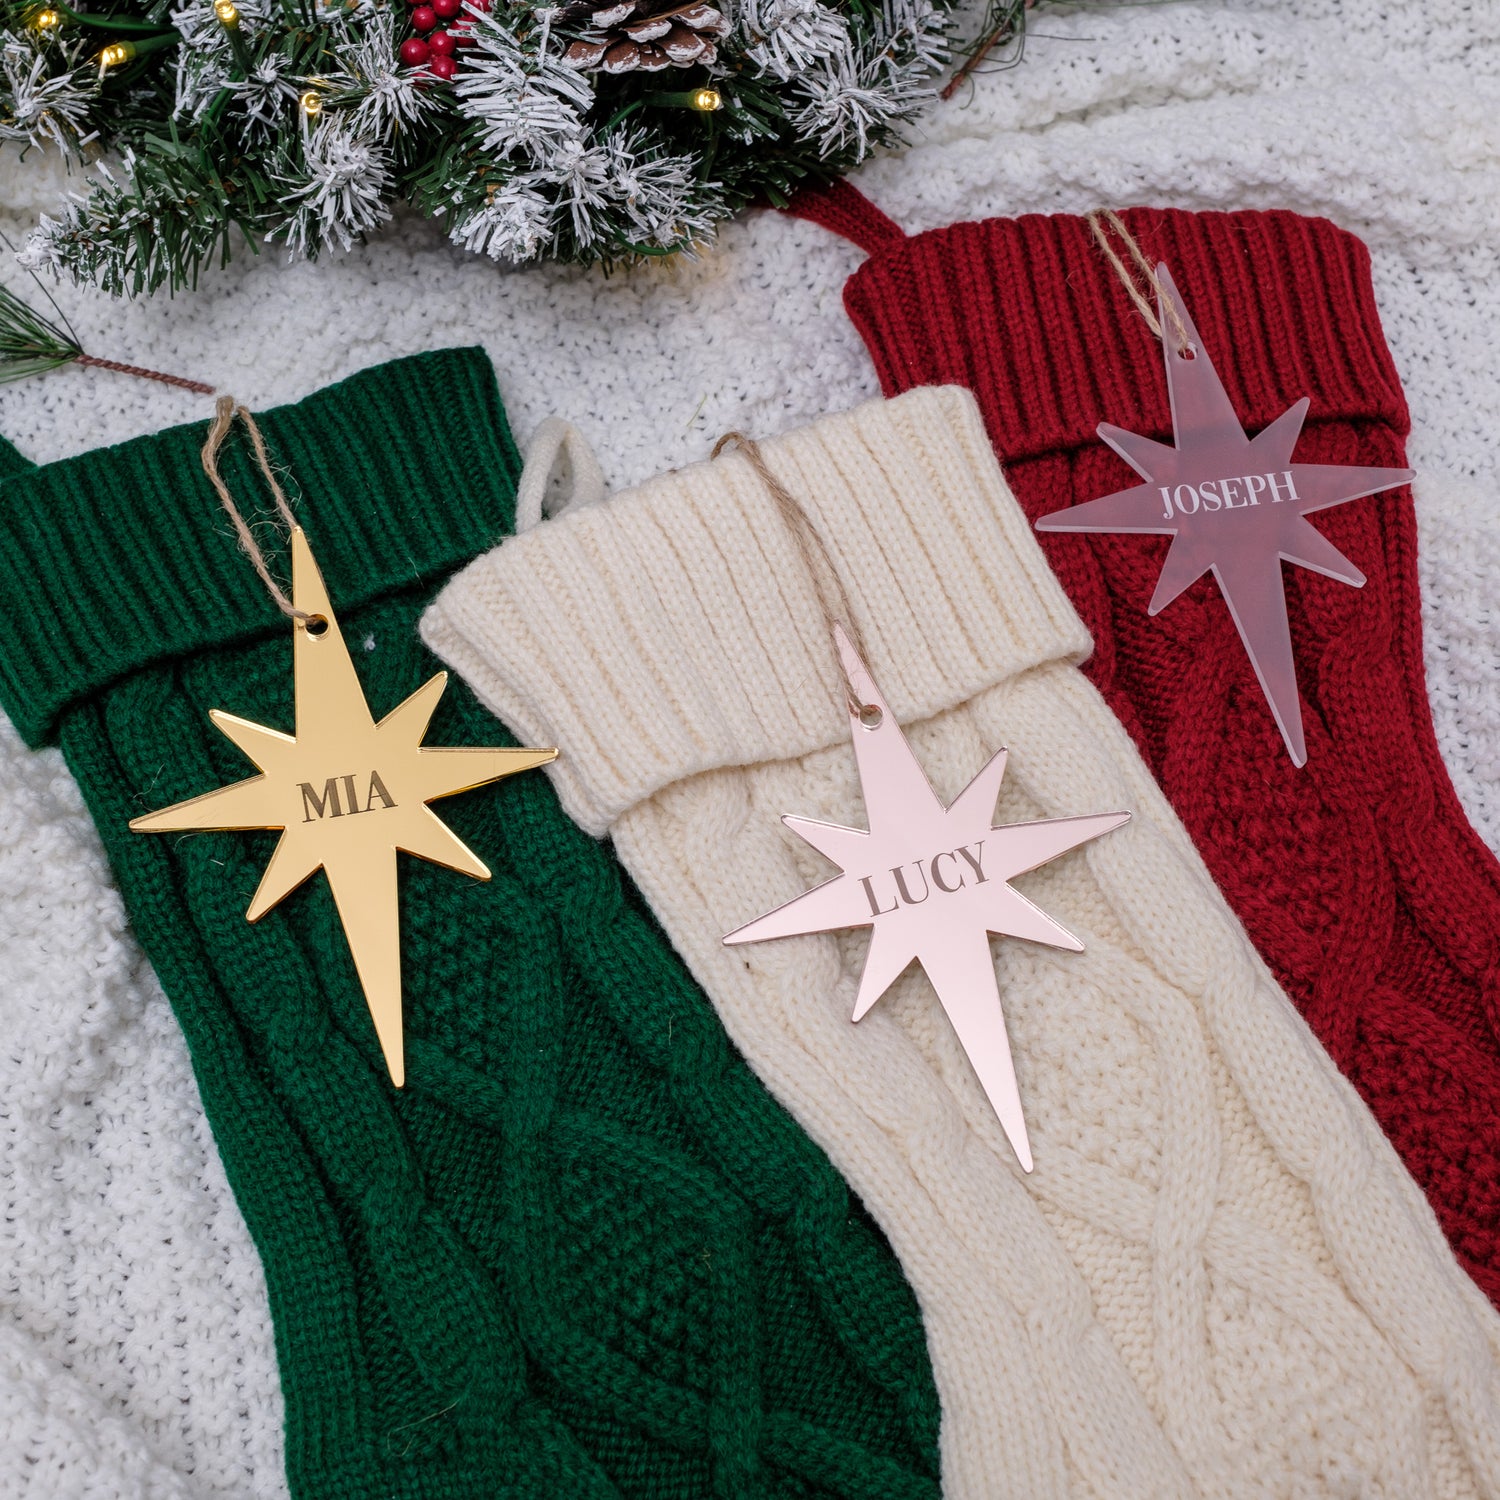 Personalized knitted stockings